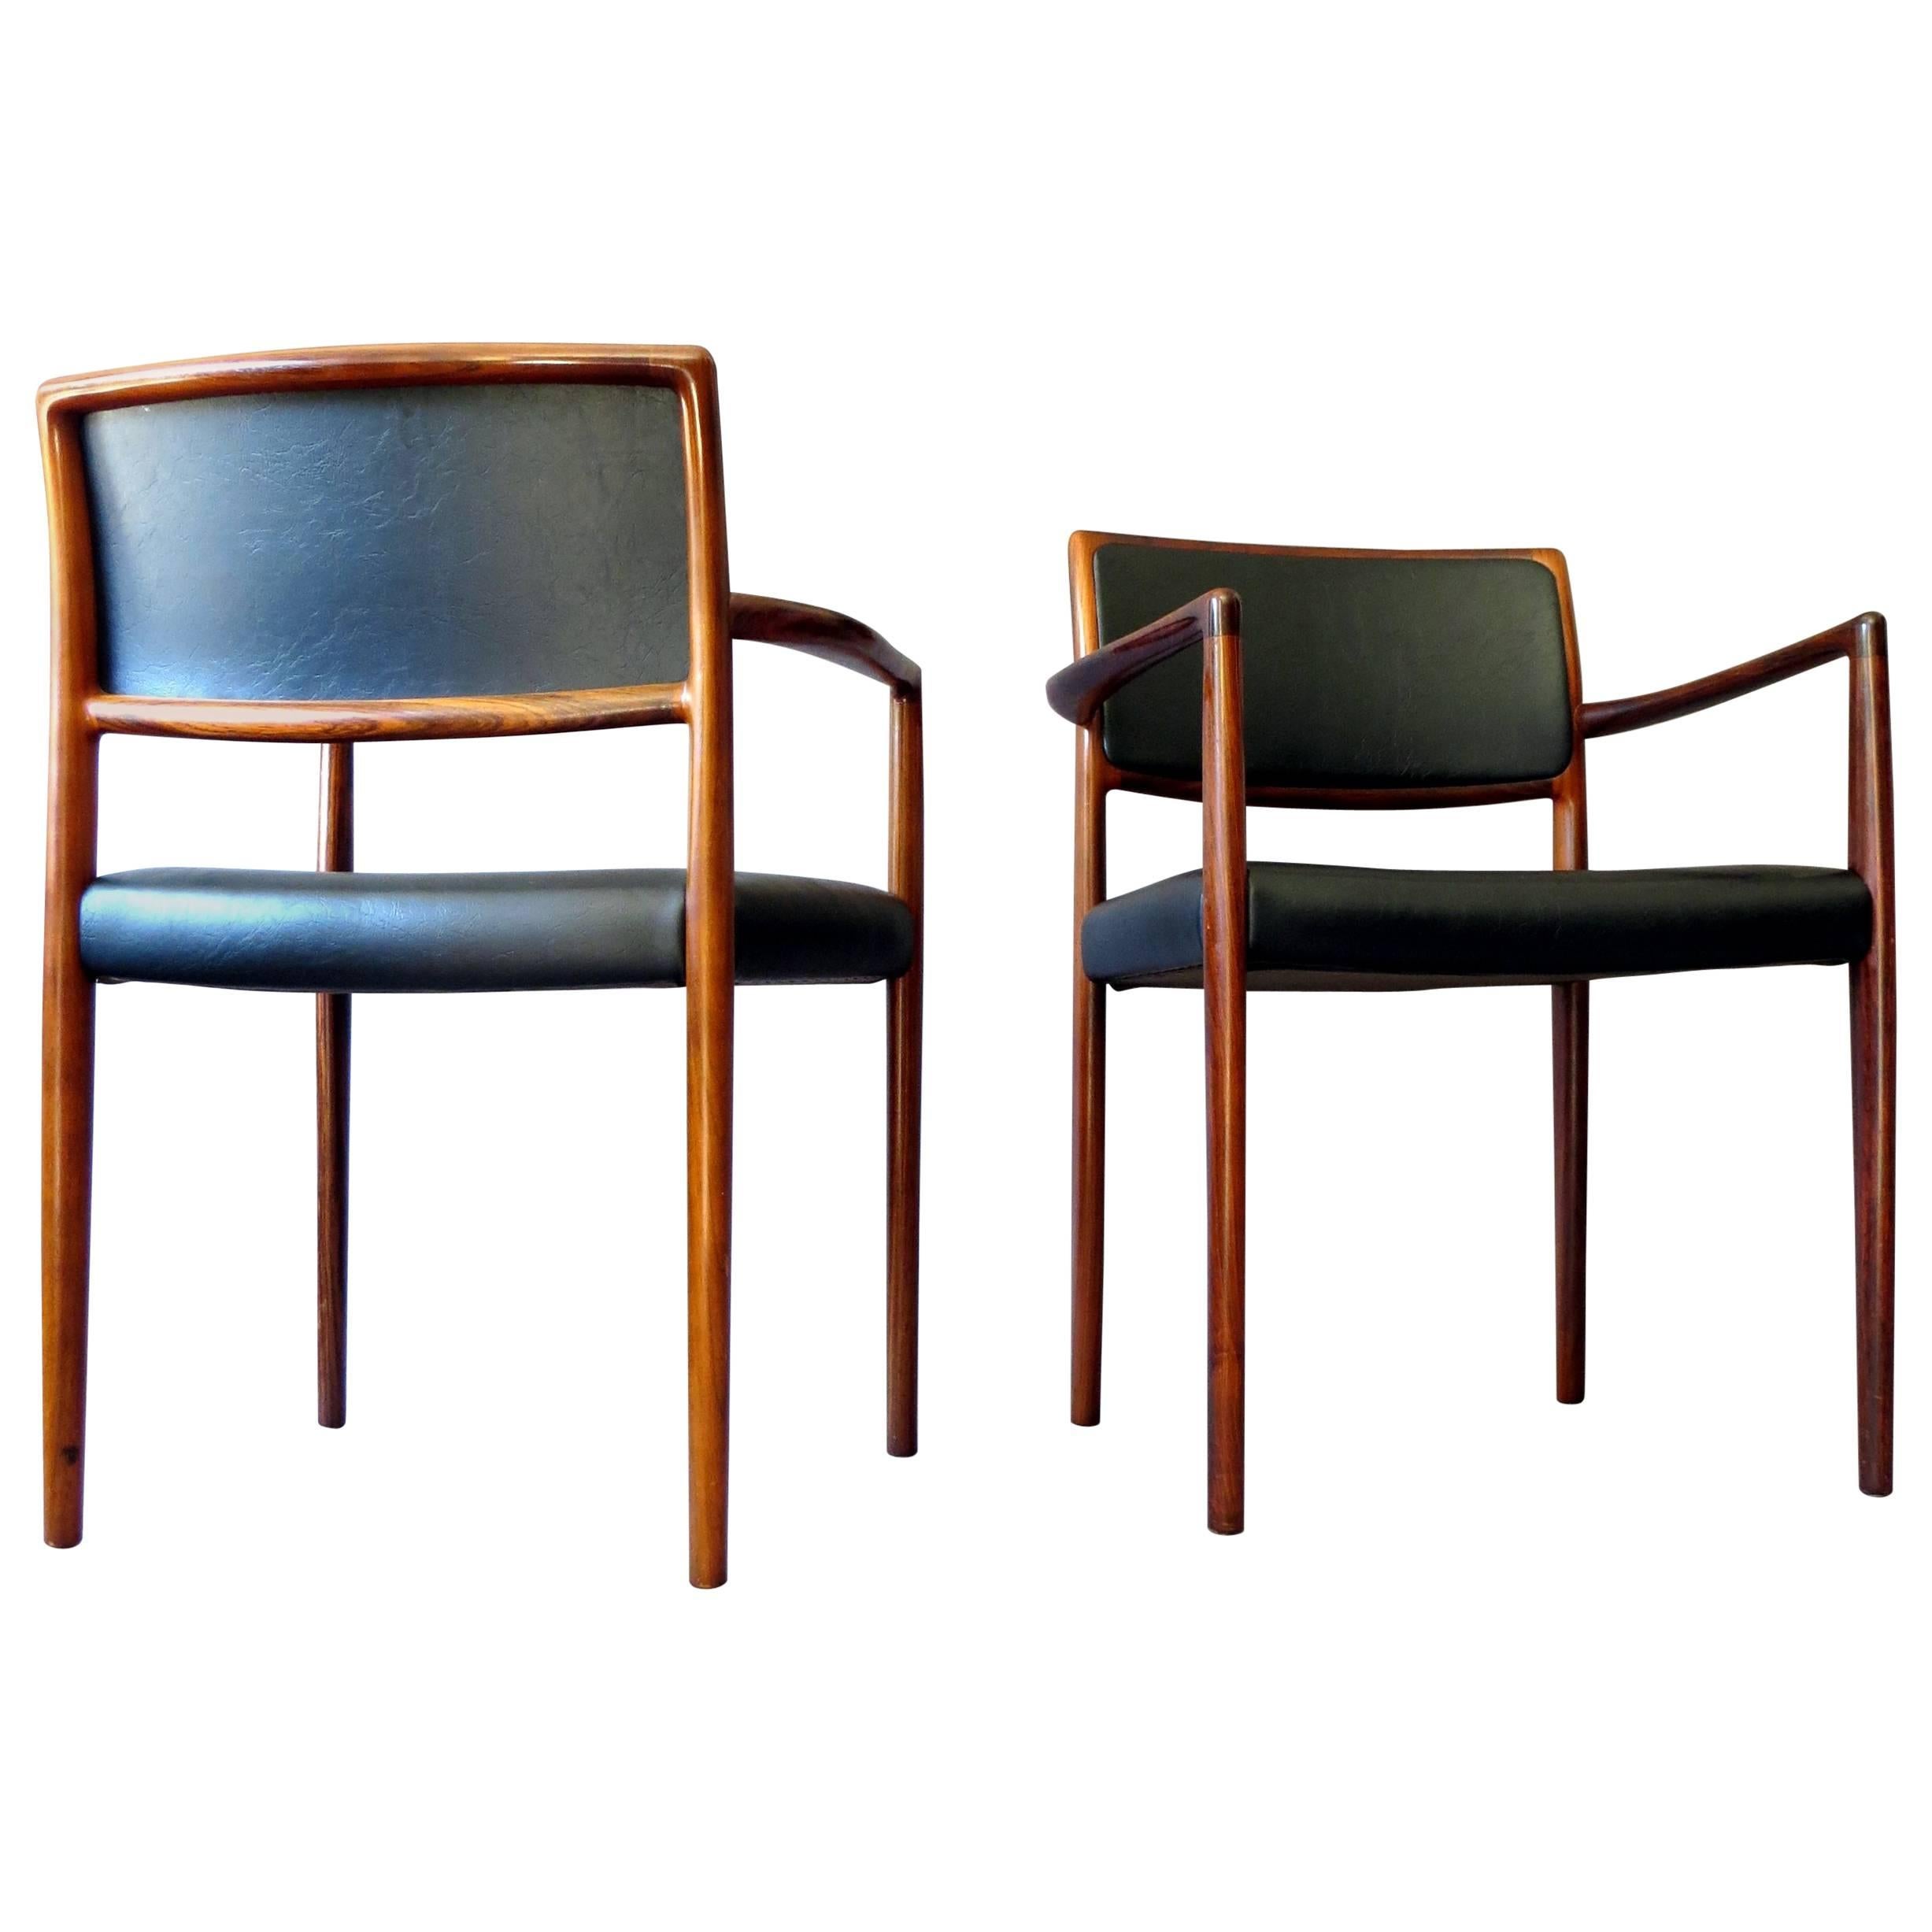 Danish Mid-Century Modern Rosewood and Leather Dining Chairs, Set of Two, 1960s For Sale